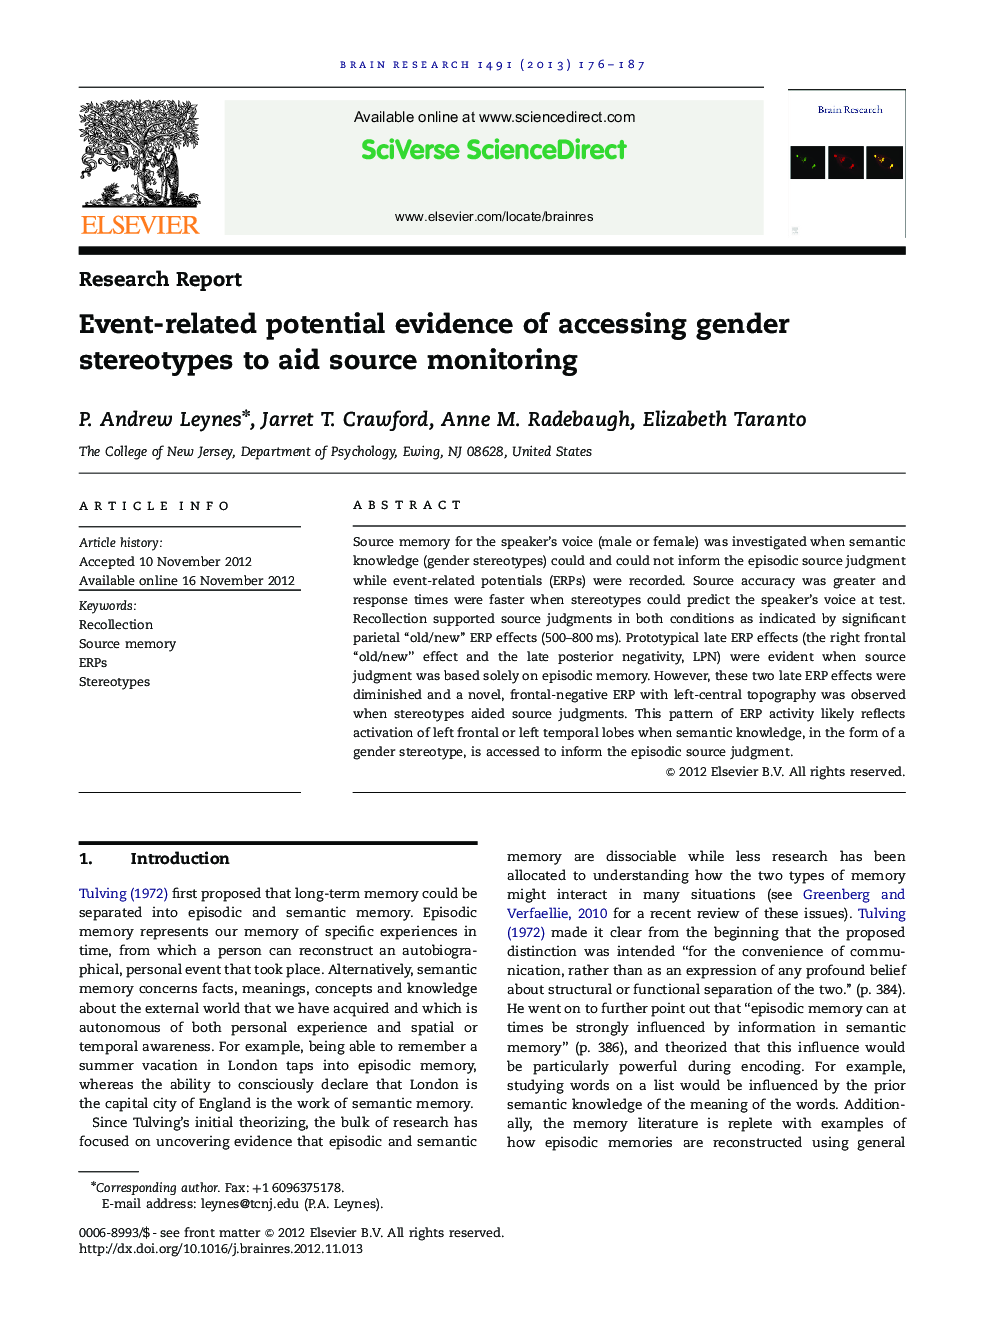 Research ReportEvent-related potential evidence of accessing gender stereotypes to aid source monitoring